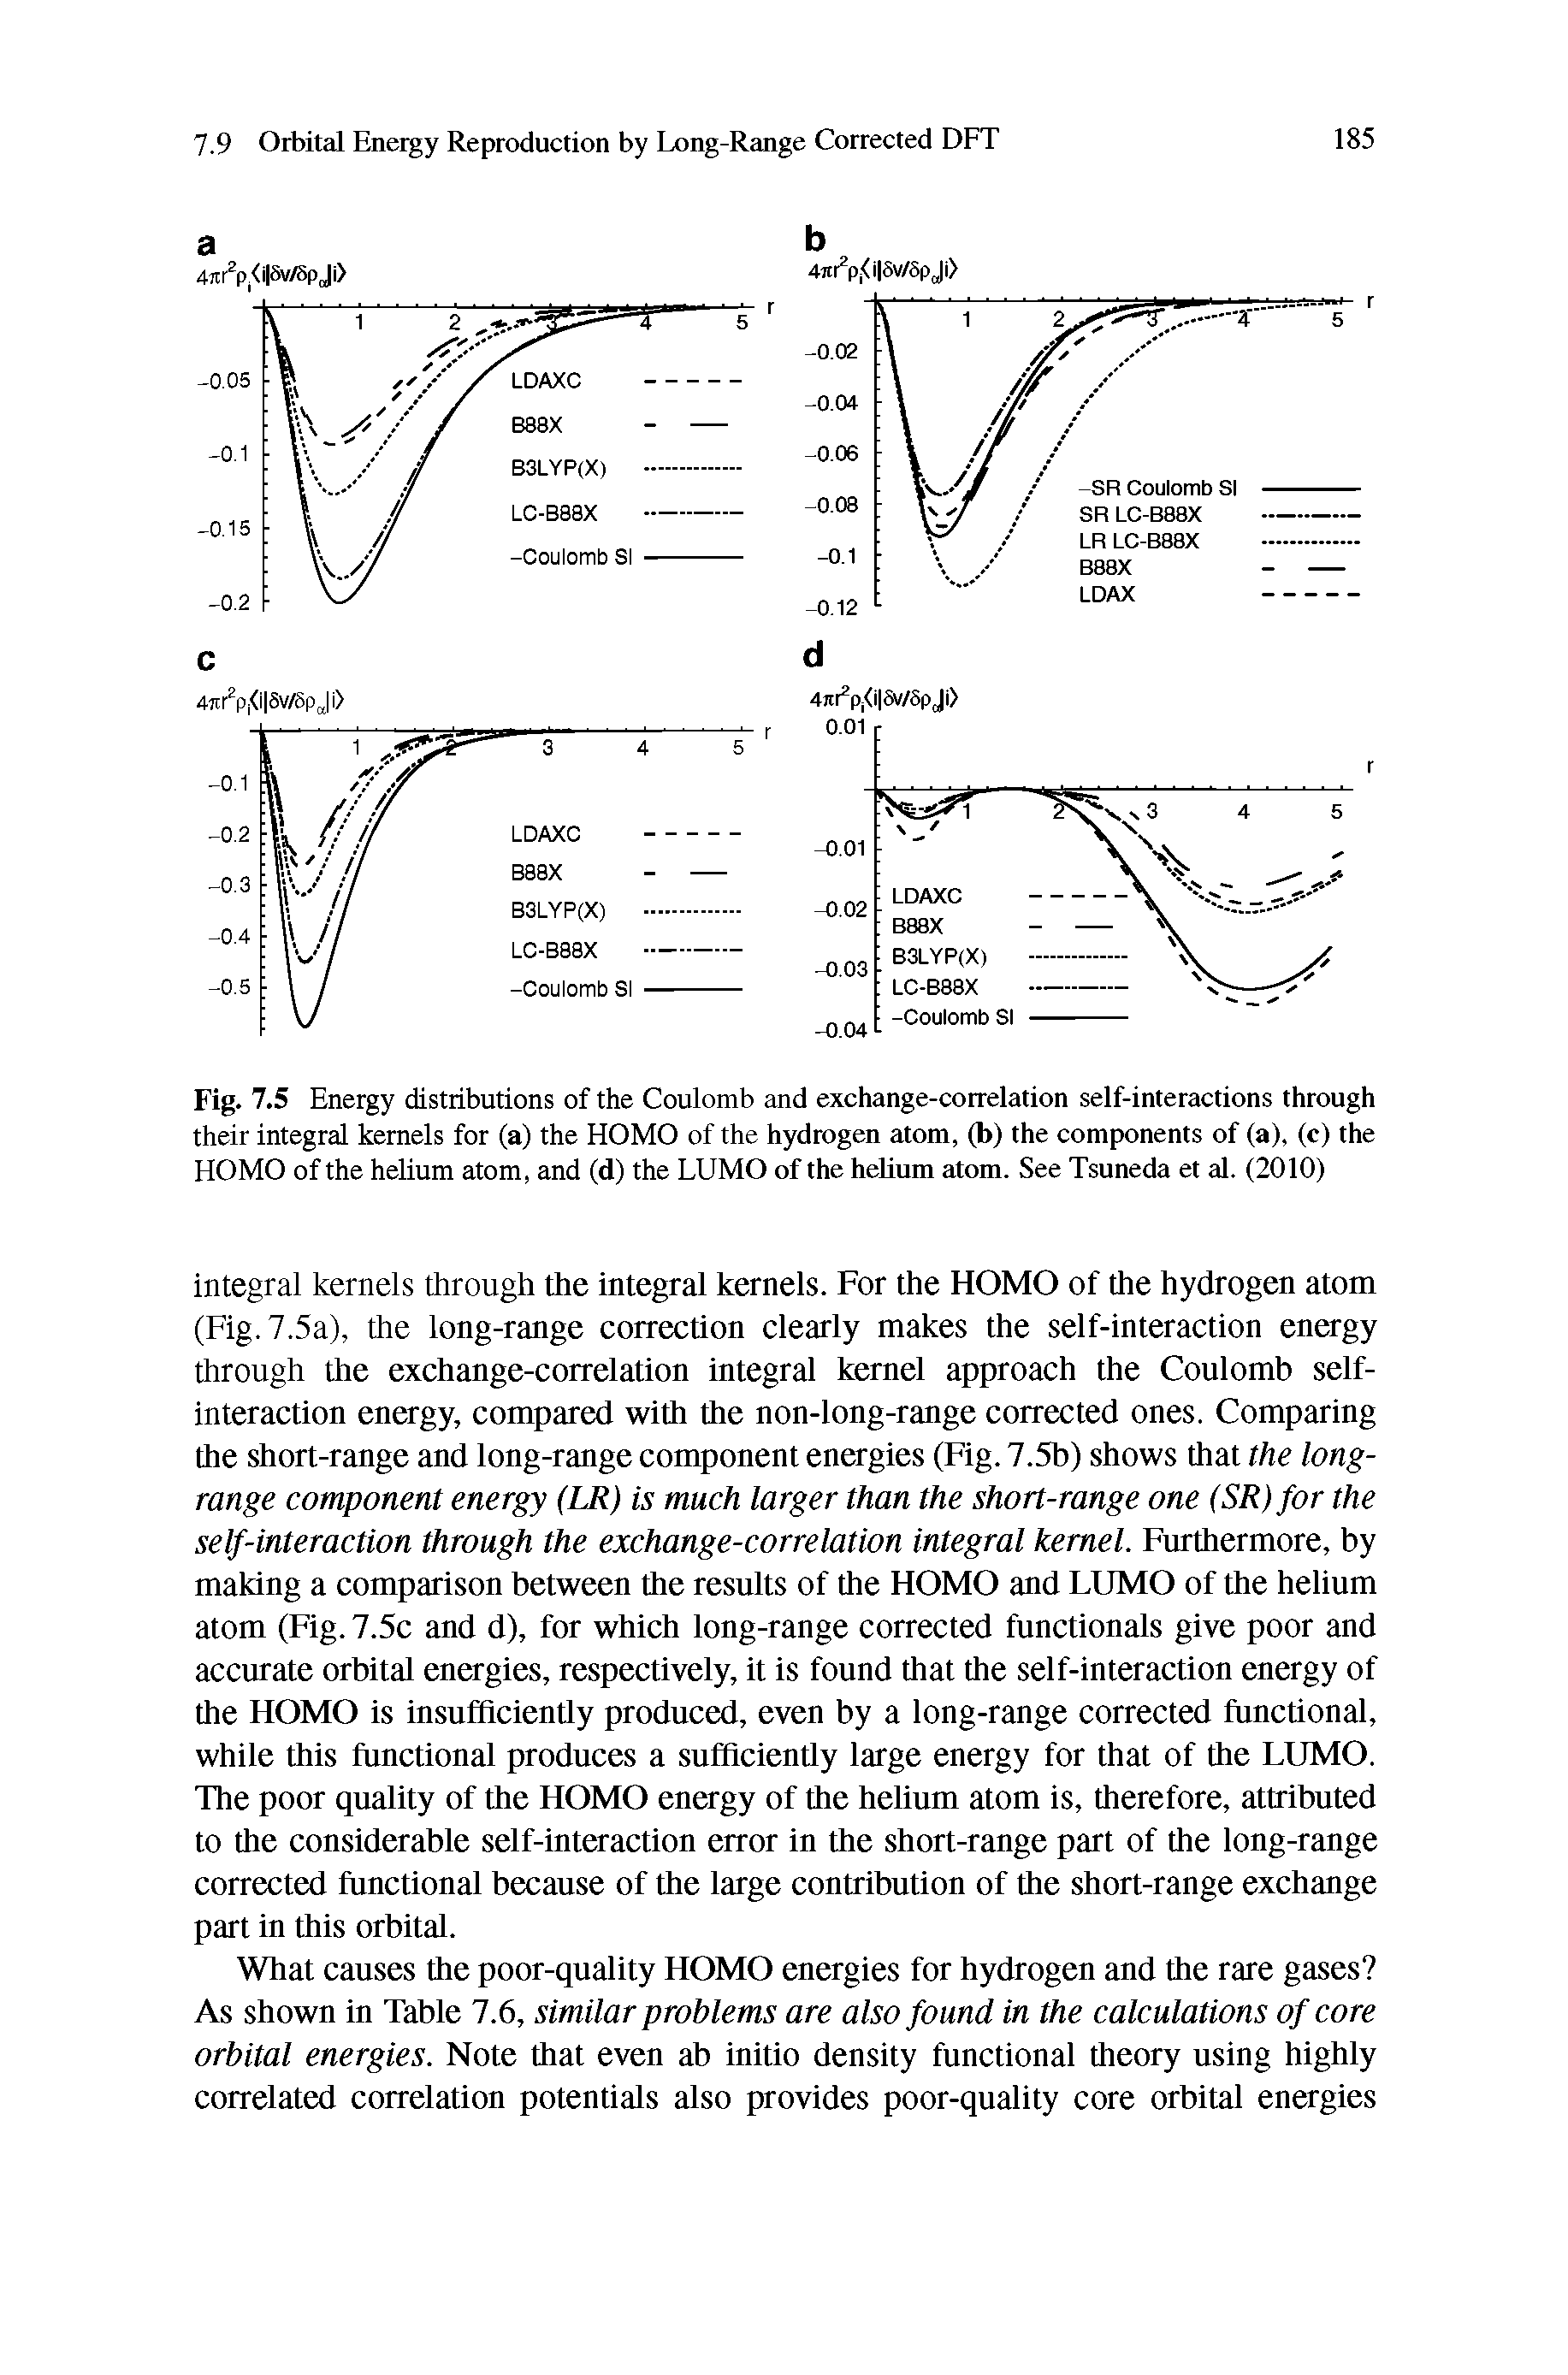 Fig. 7.5 Energy distributions of the Coulomb and exchange-correlation self-interactions through their integral kernels for (a) the HOMO of the hydrogen atom, (b) the components of (a), (c) the HOMO of the helium atom, and (d) the LUMO of the helium atom. See Tsuneda et al. (2010)...